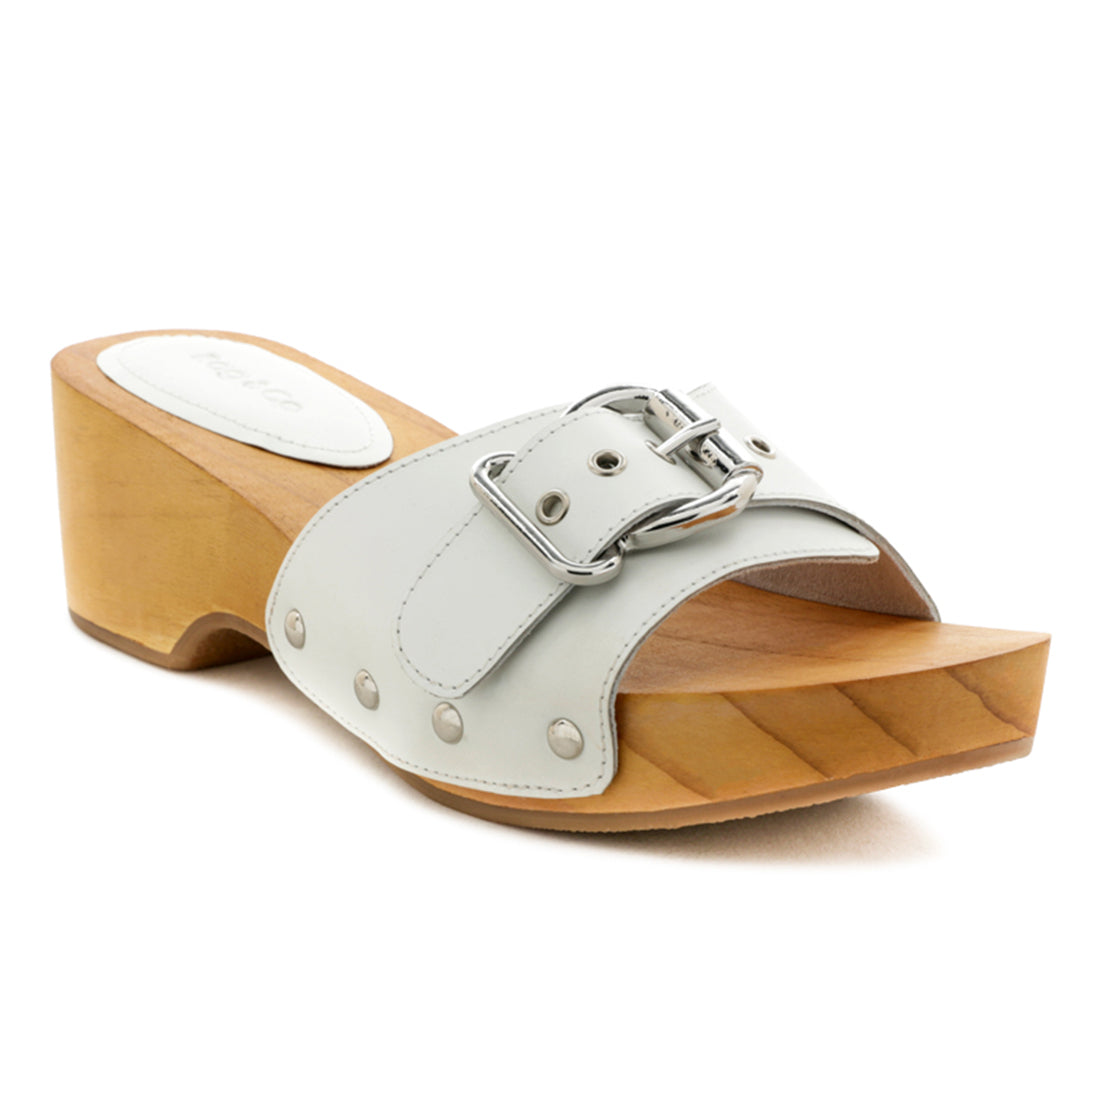 Studded Leather Wooden Clogs in White